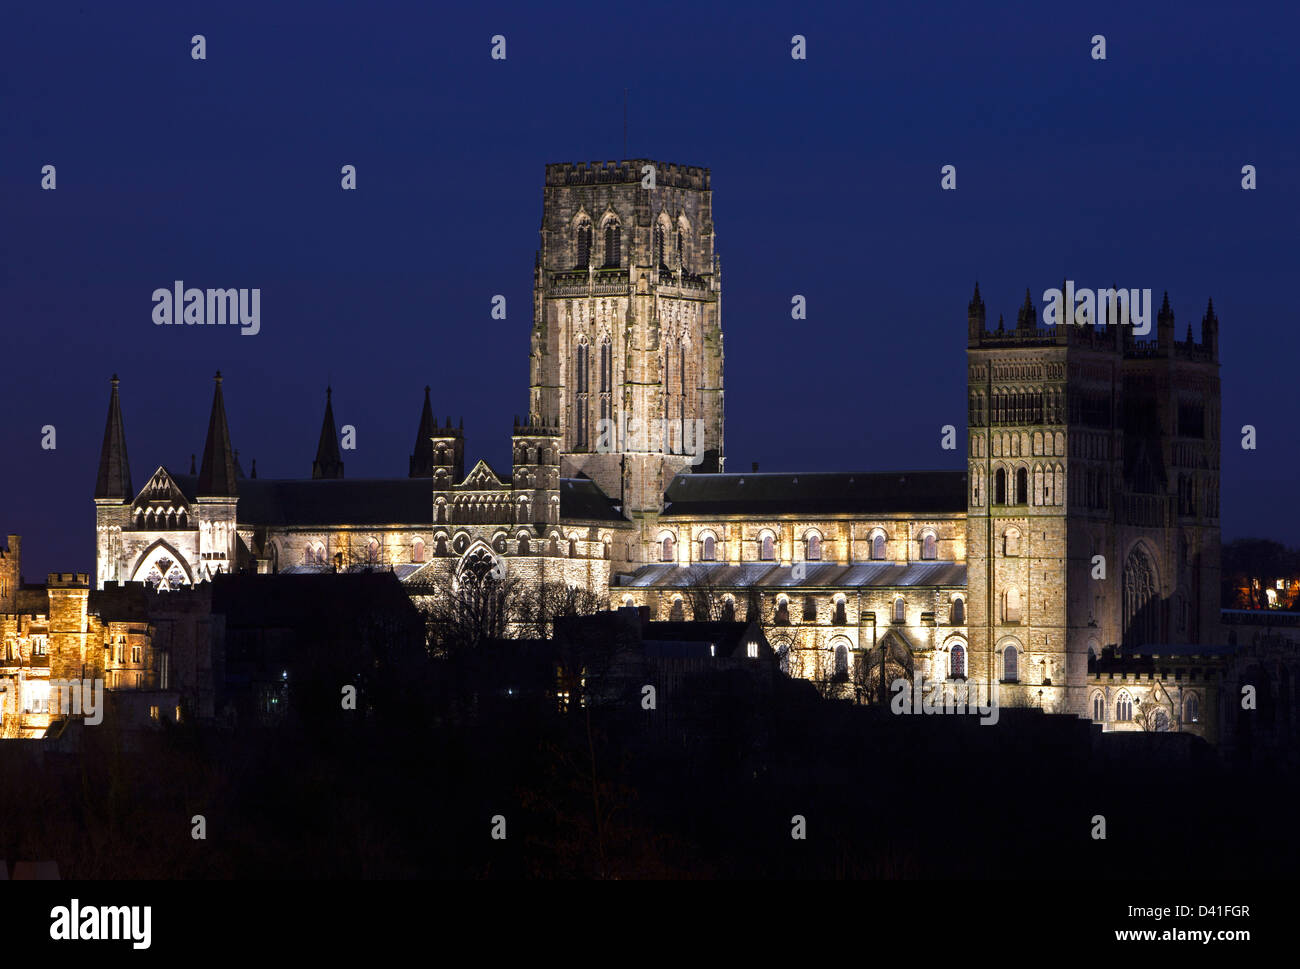 A view of Durham Cathedral floodlit at night as seen from an elevated position at Durham Railway Station Stock Photo